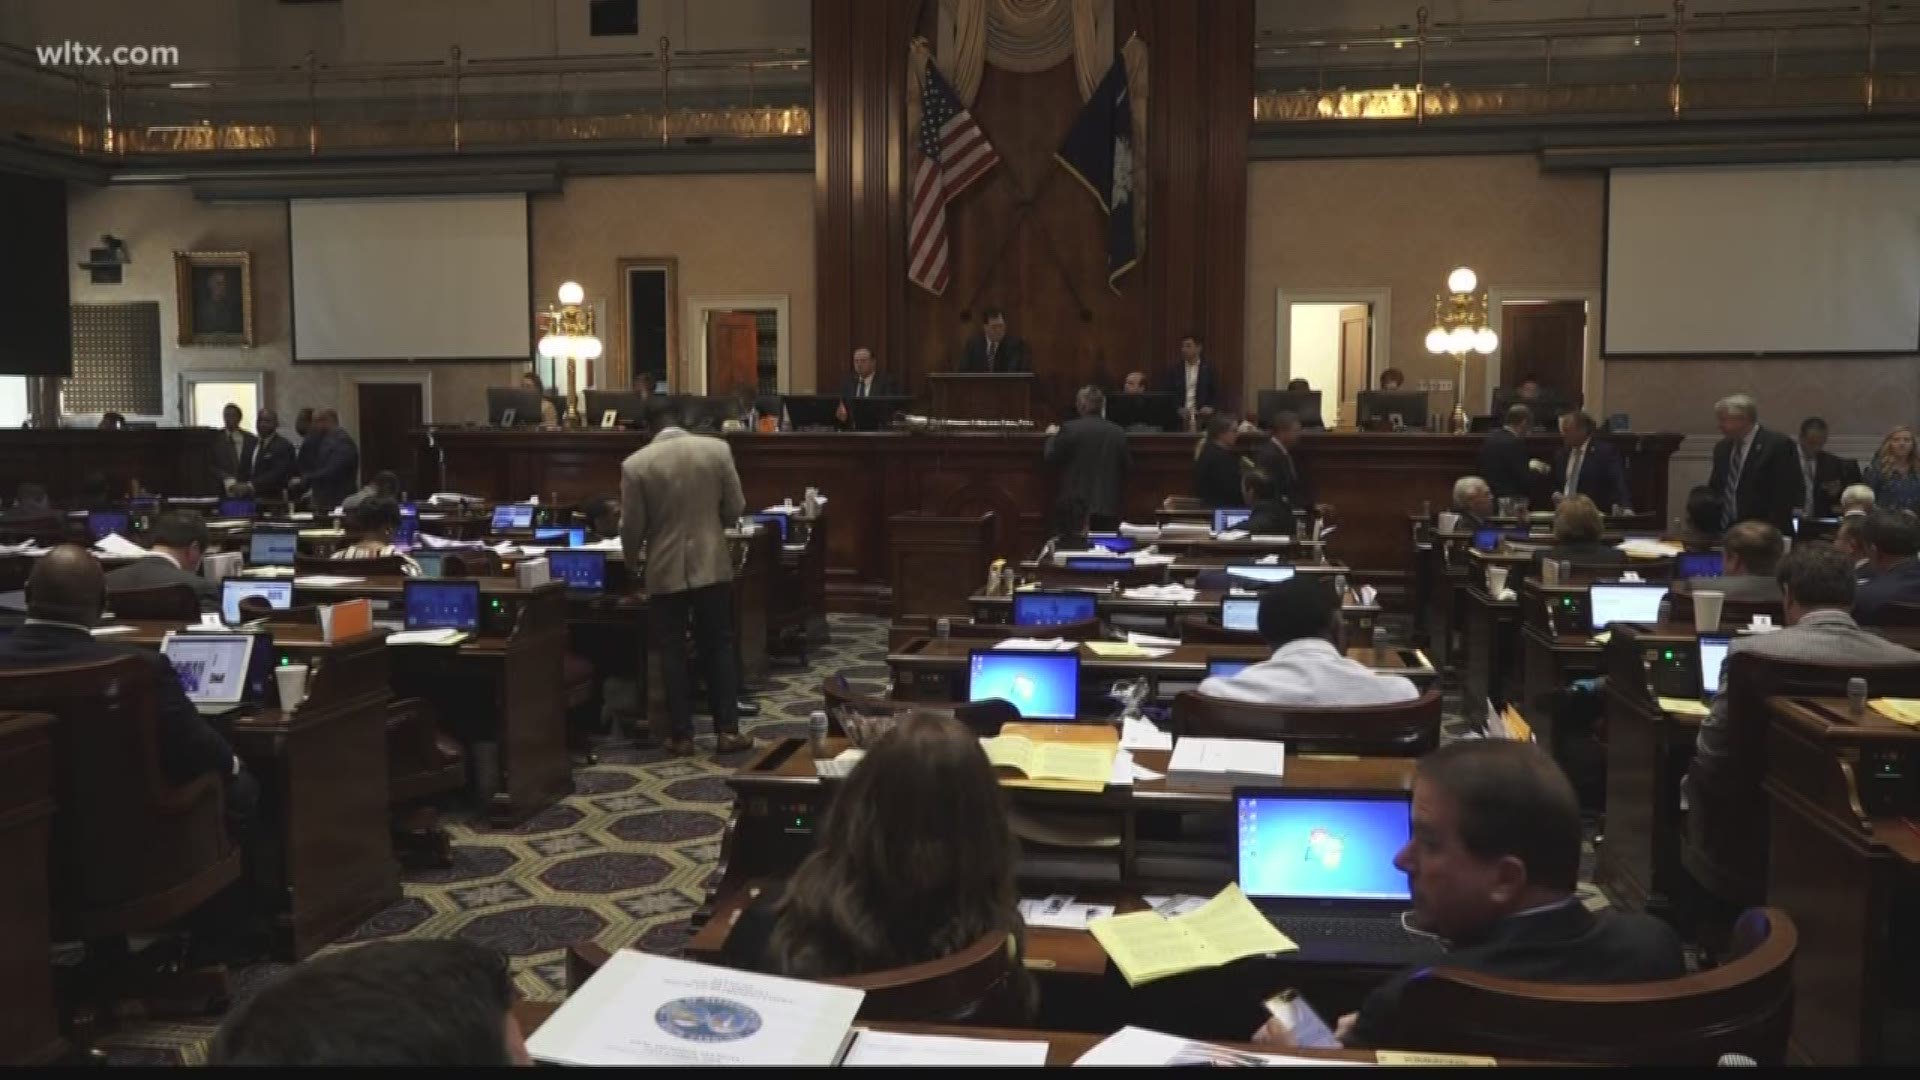 Today is the deadline for proposed House and Senate bills to be sent across the lobby for review in the other chamber before the current session ends in May.